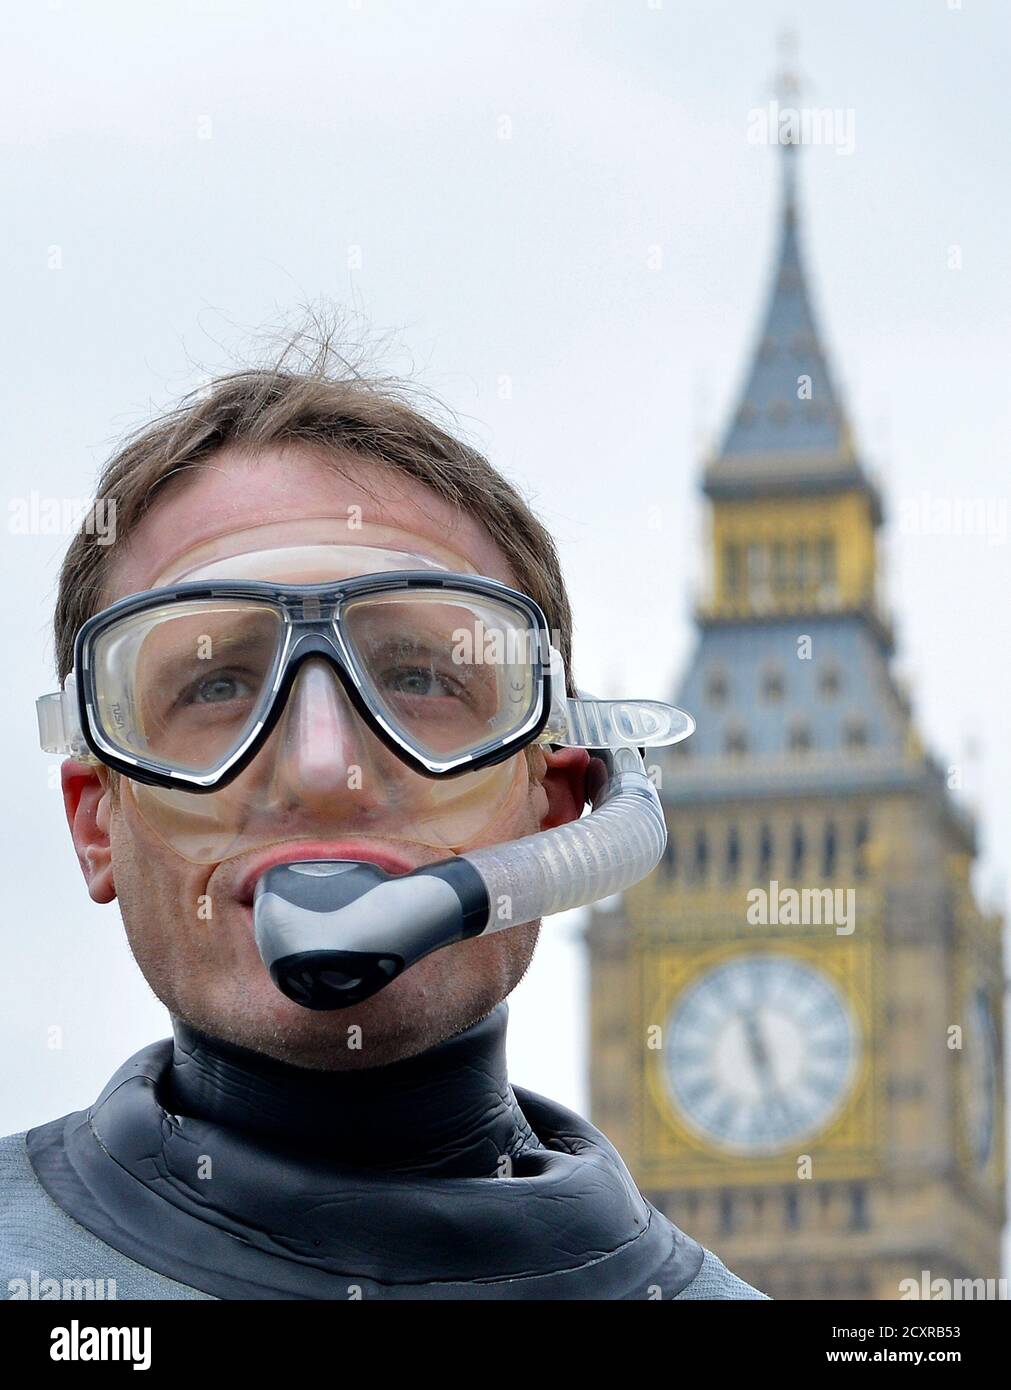 A demonstrator wears a mask and snorkel during a protest by environmental campaigners calling on the government to provide more Marine Conservation Zones (MCZs) in British waters, London February 25, 2013.  REUTERS/Toby Melville (BRITAIN - Tags: POLITICS ENVIRONMENT MARITIME) Stock Photo